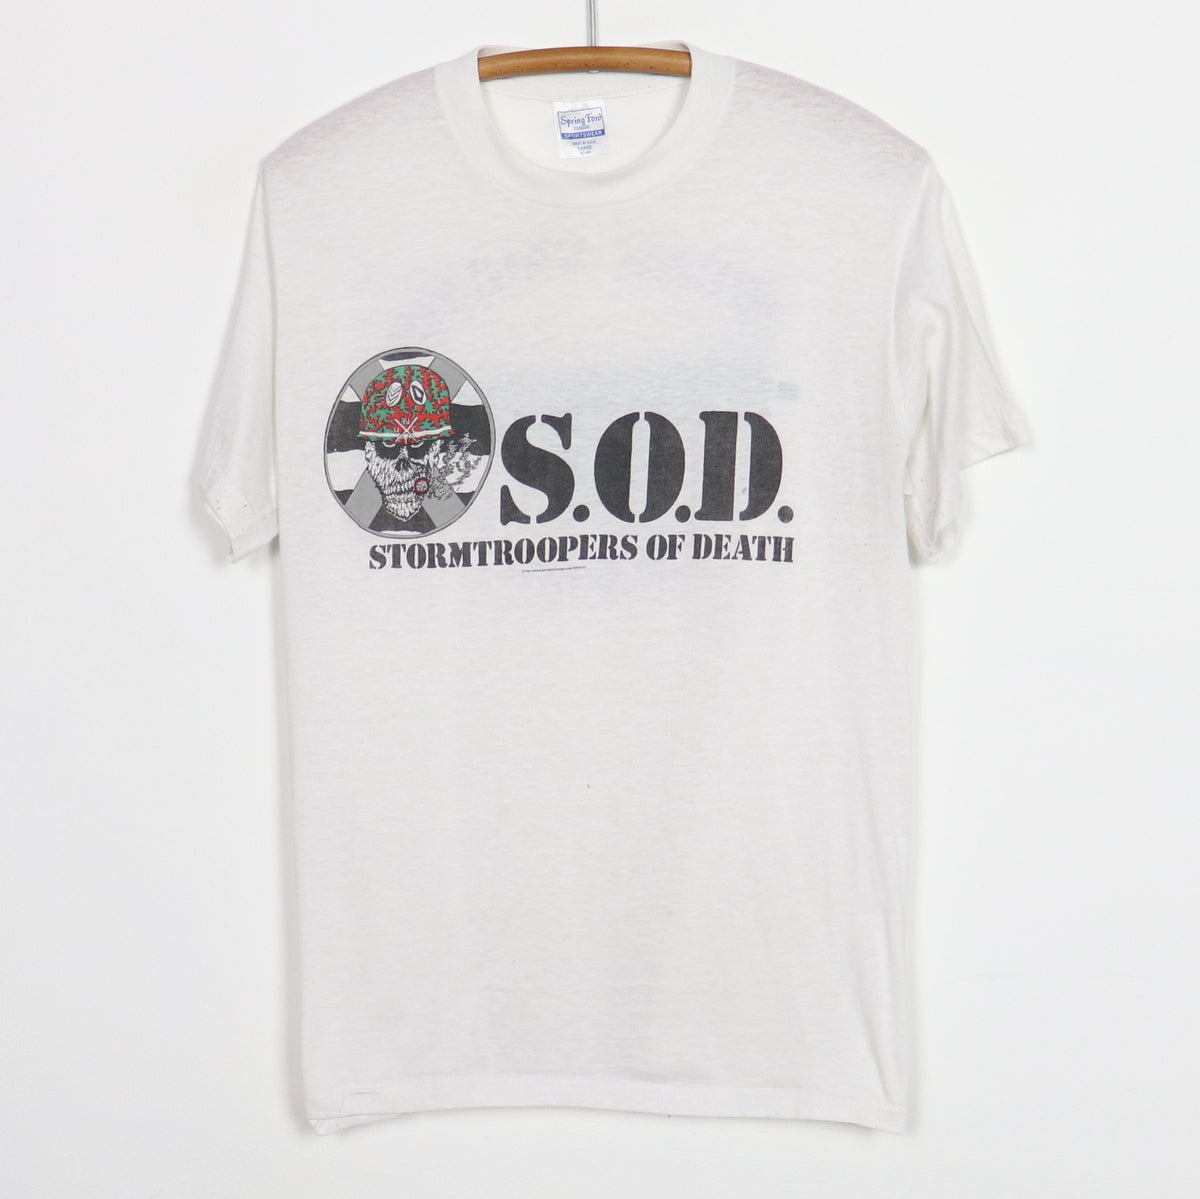 1987 Stormtroopers Of Death Schism Tour Shirt